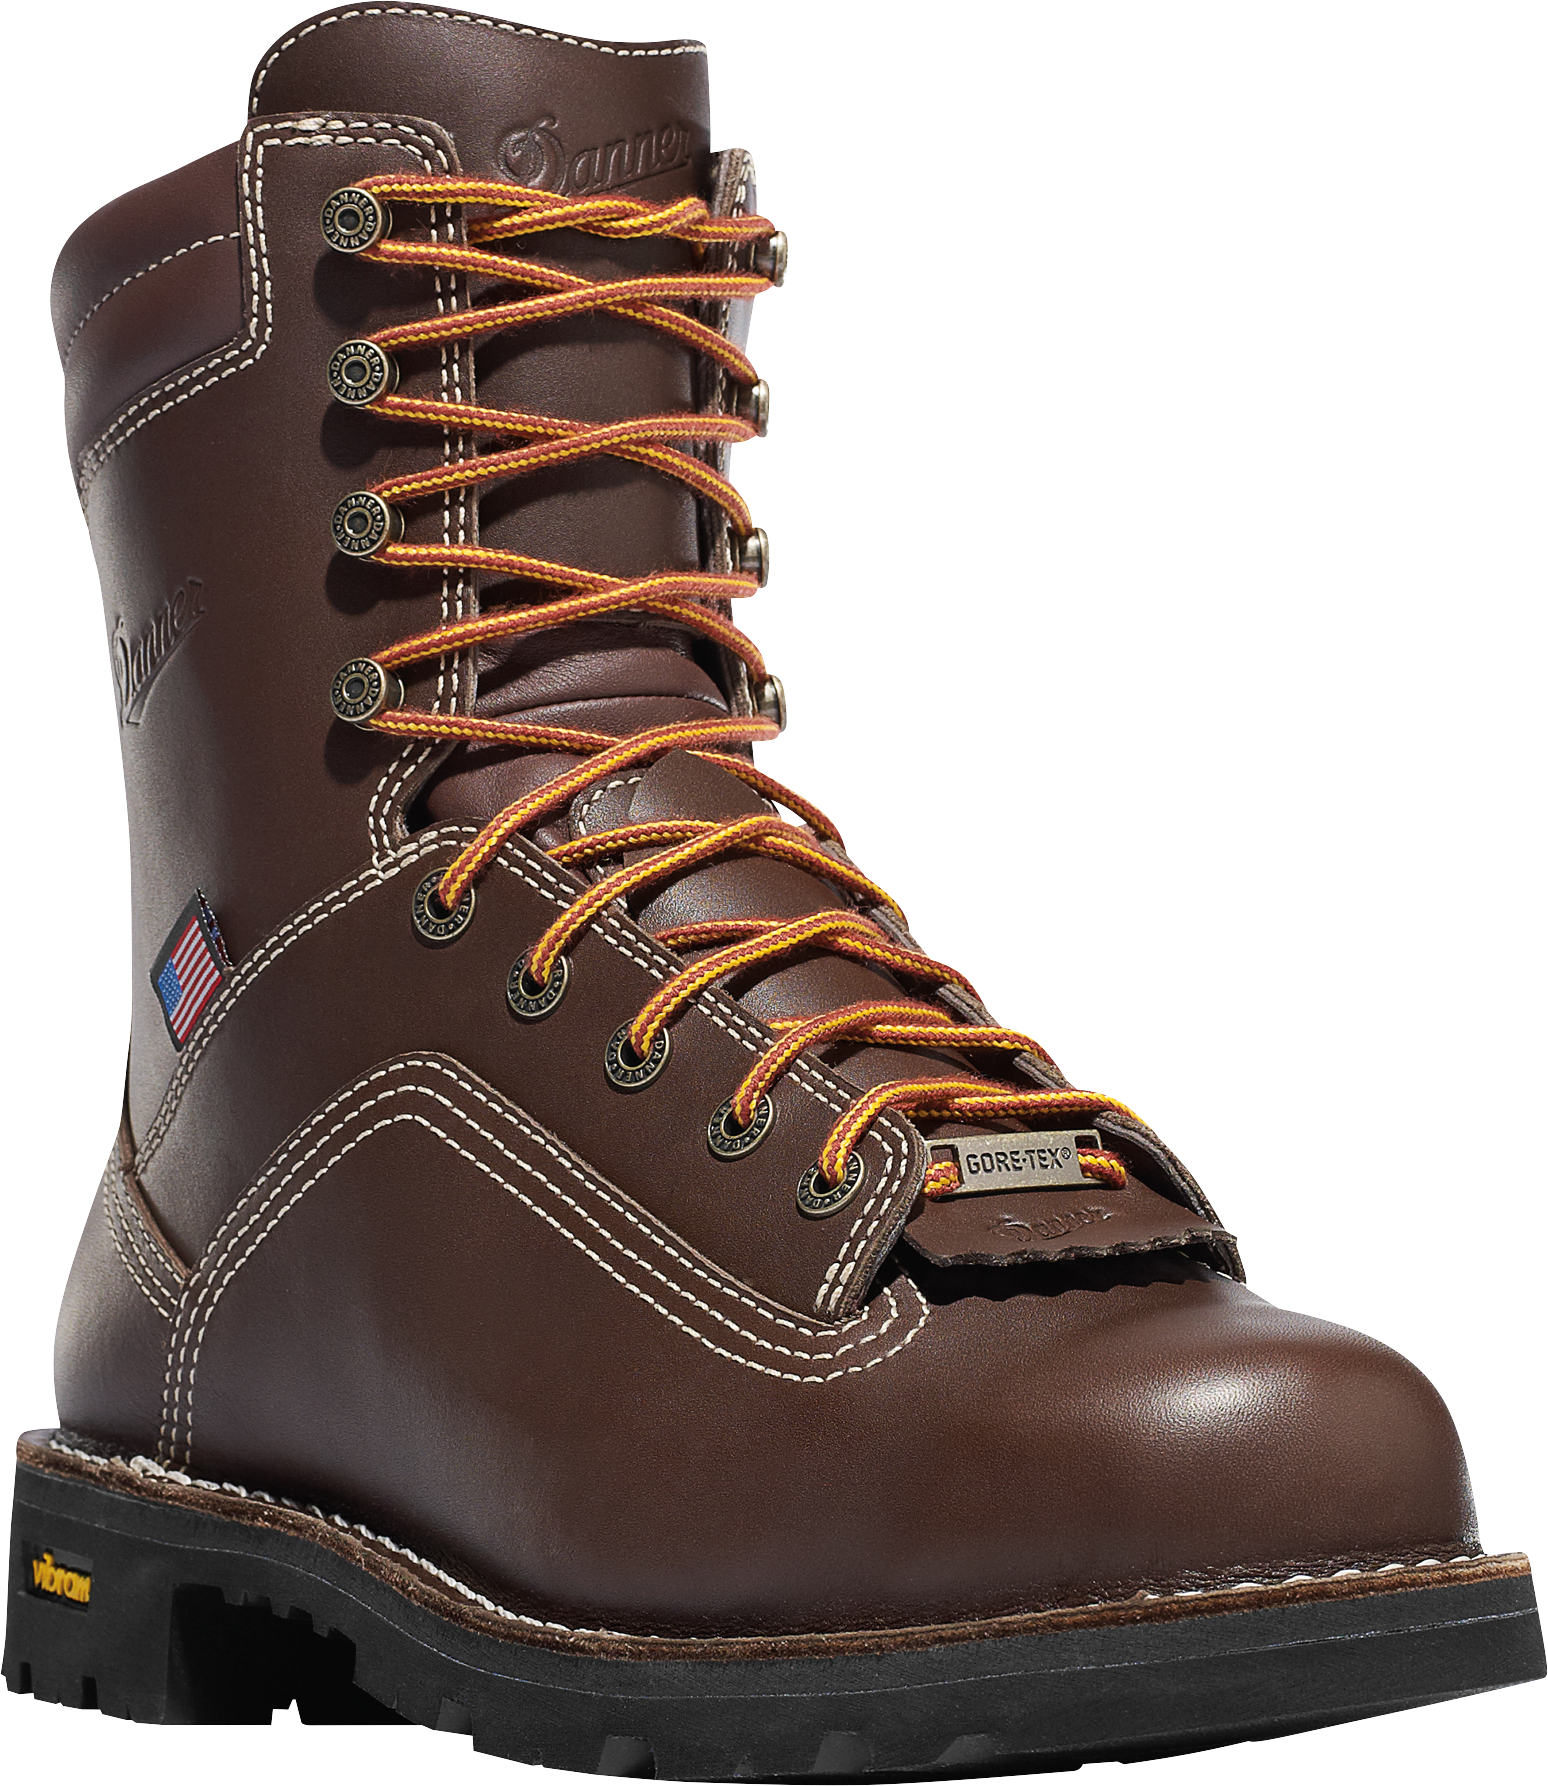 Danner Quarry USA GORE-TEX Work Boots for Men - Brown - 7M